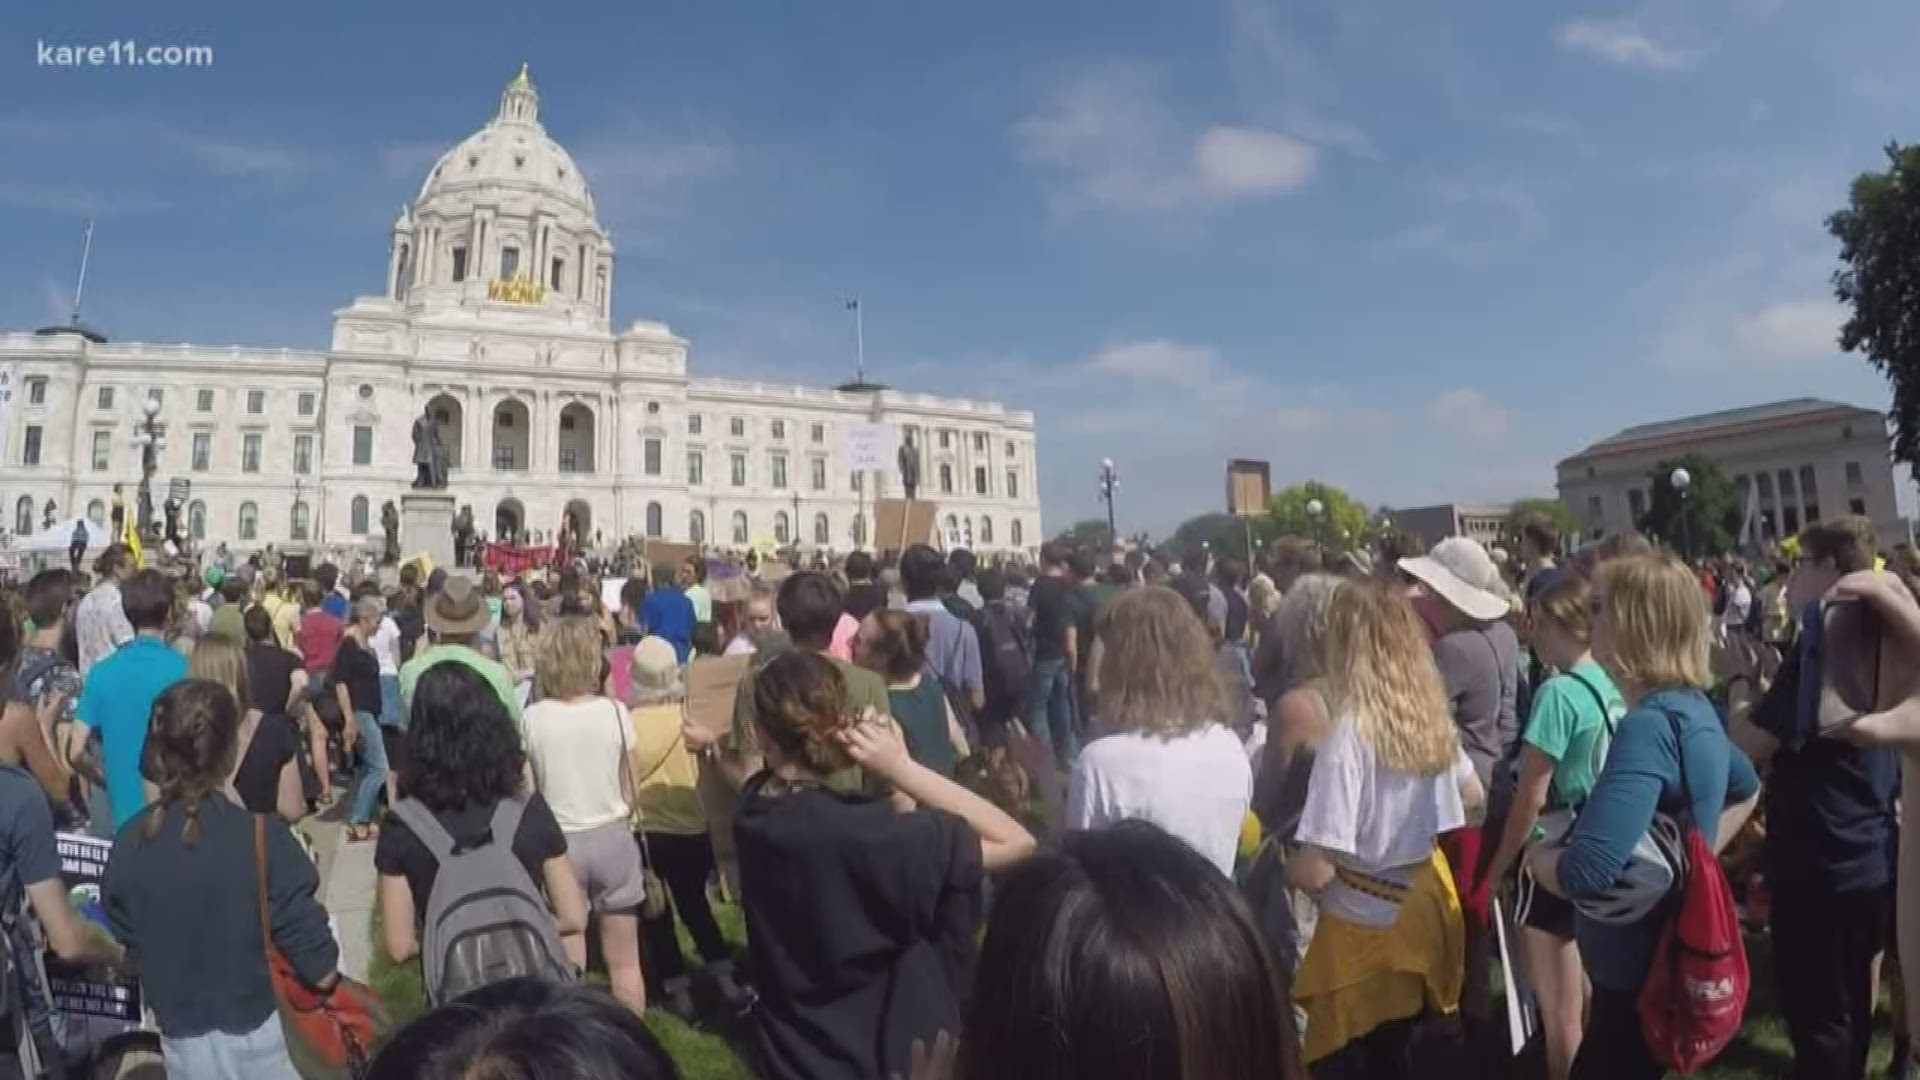 Police estimated the Youth Climate Strike crowd at the Minn. State Capitol at 6,000 Friday. Students say they're worried about the planet's viability.